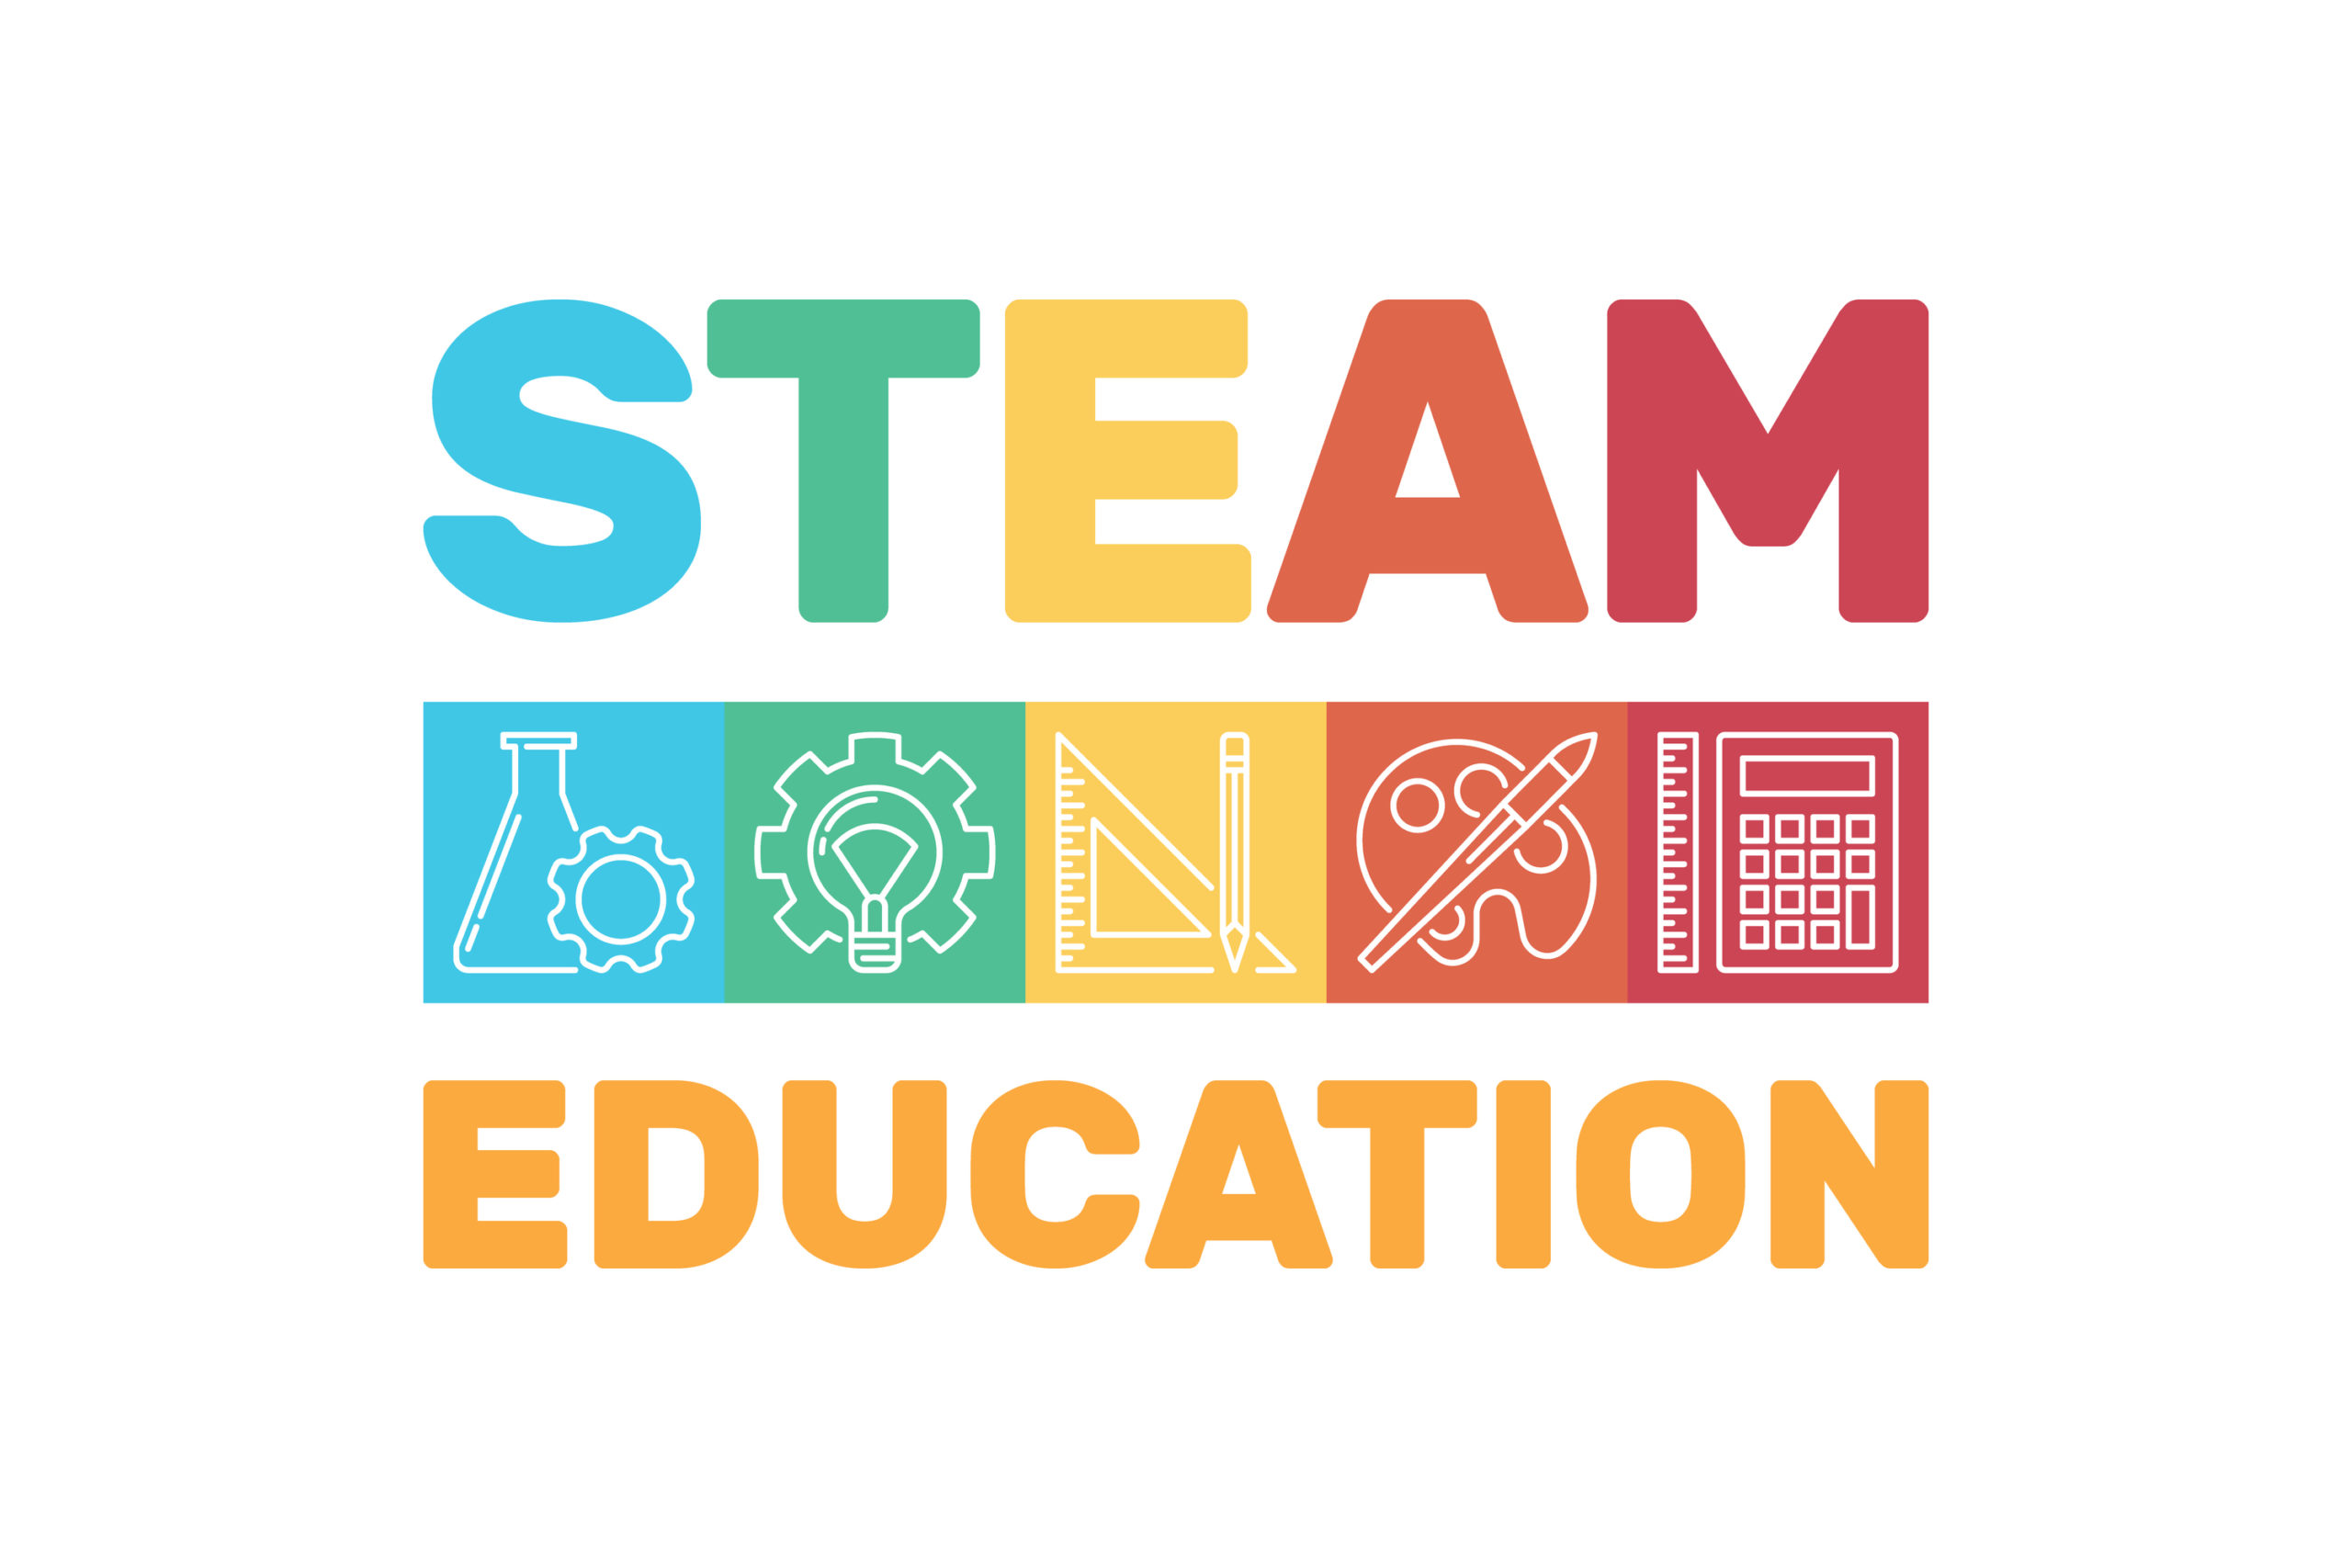 Encourage Students to Pursue Tech: Join National STEAM Day! (November 8) -   Powered by IEEE